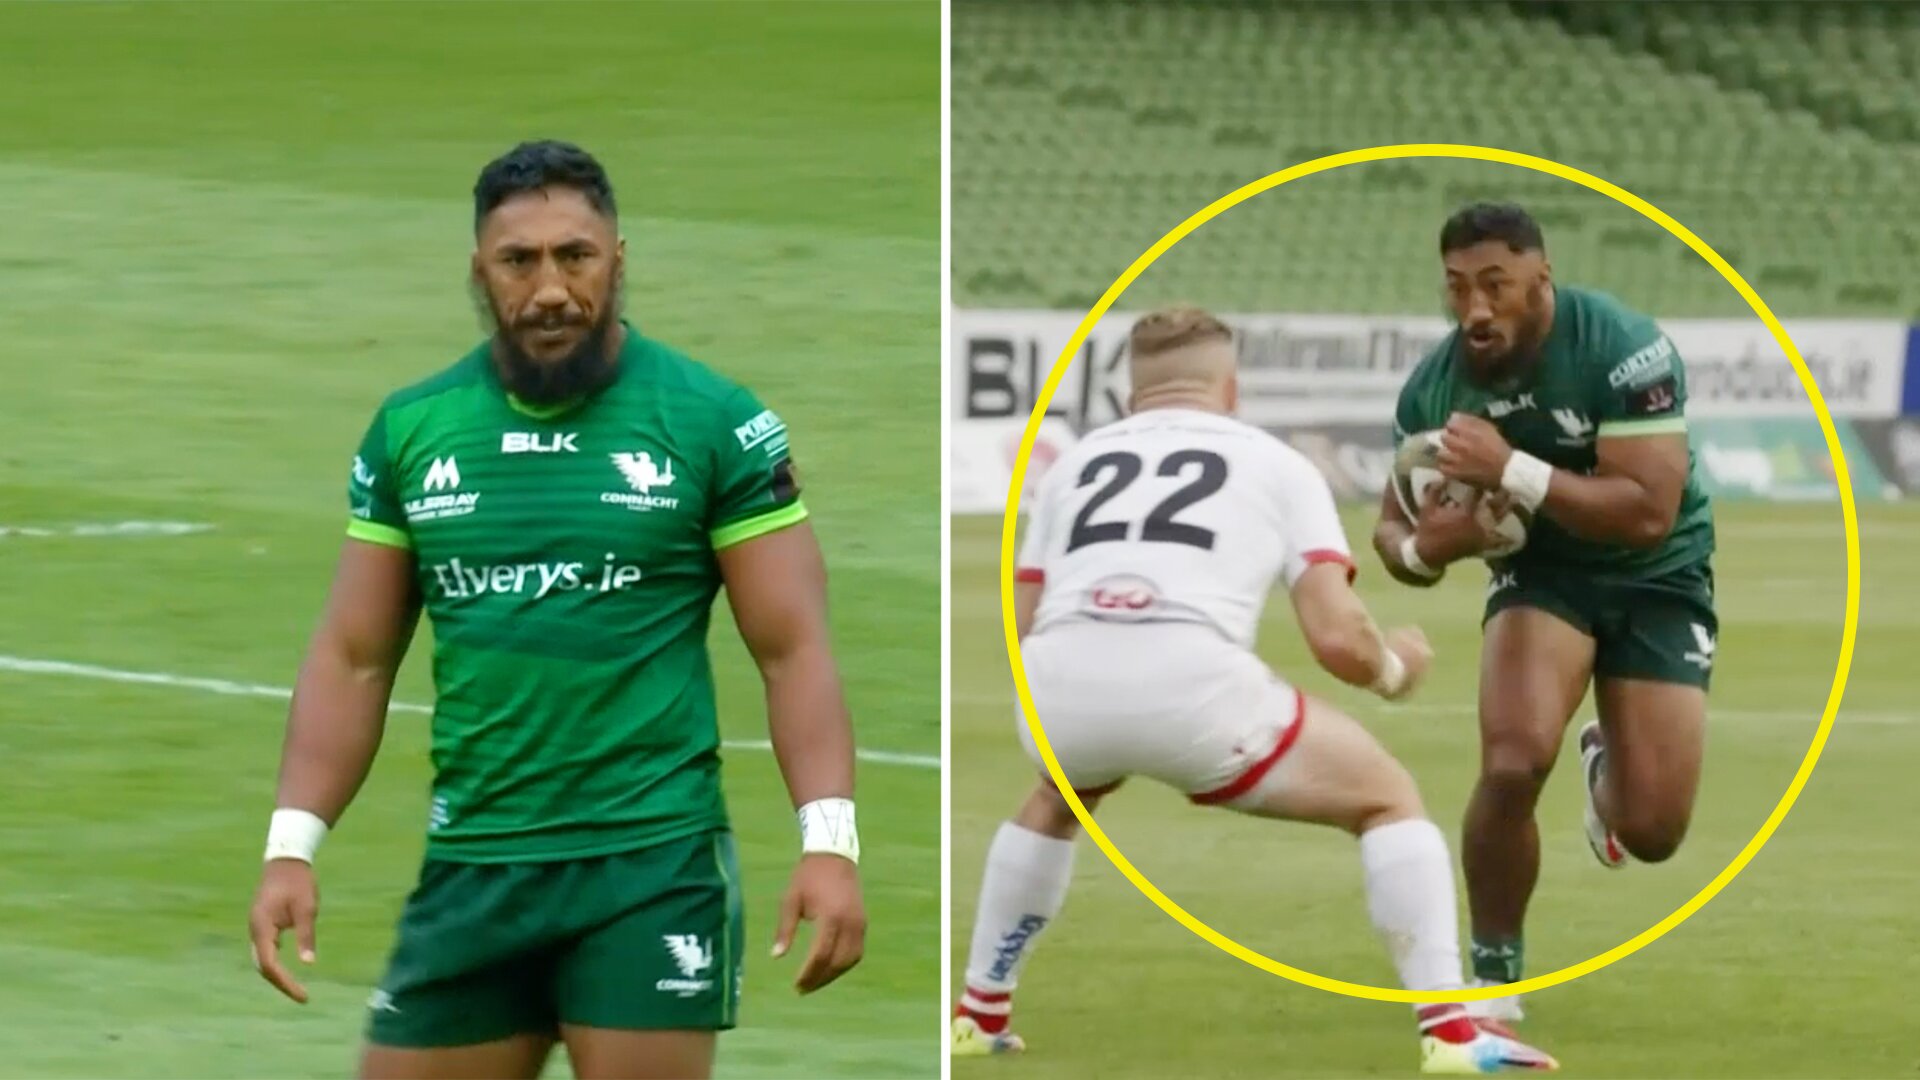 Ian Madigan's first action in an Ulster shirt is to try and stop Bundee Aki from scoring from 5m out